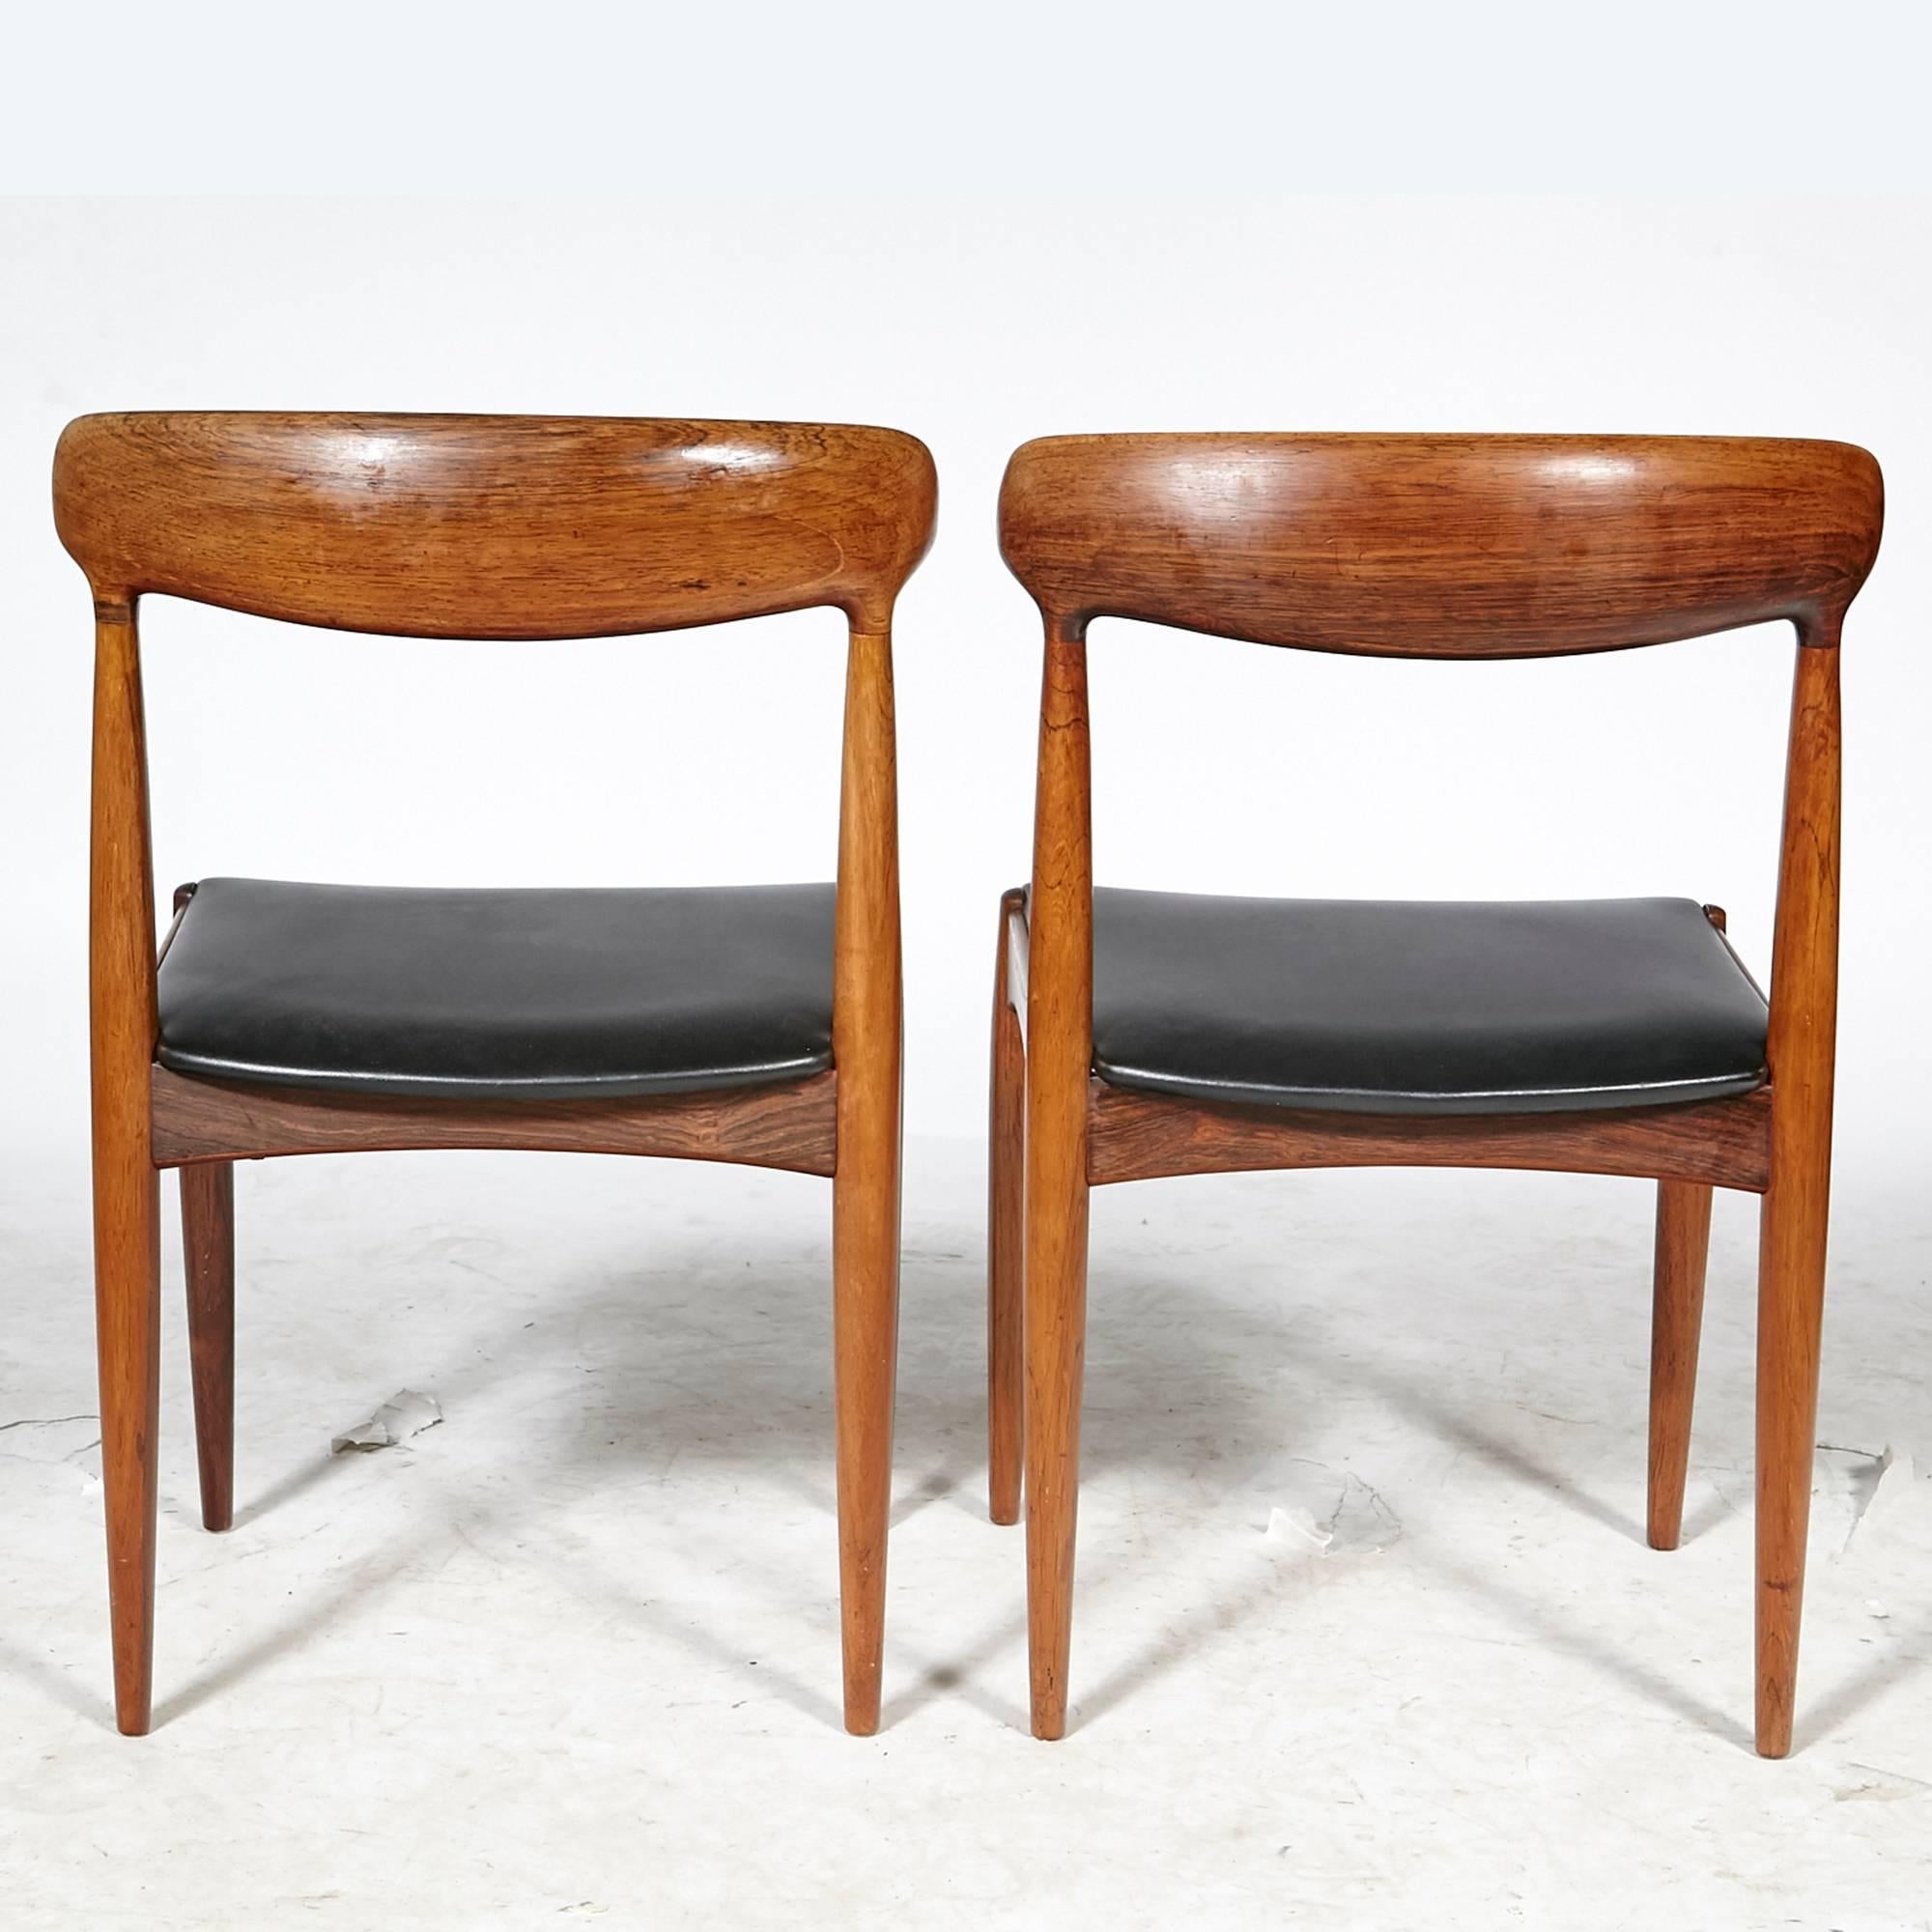 20th Century Danish Rosewood Dining Chairs by Johannes Andersen for Uldum Mobler, 1960s For Sale